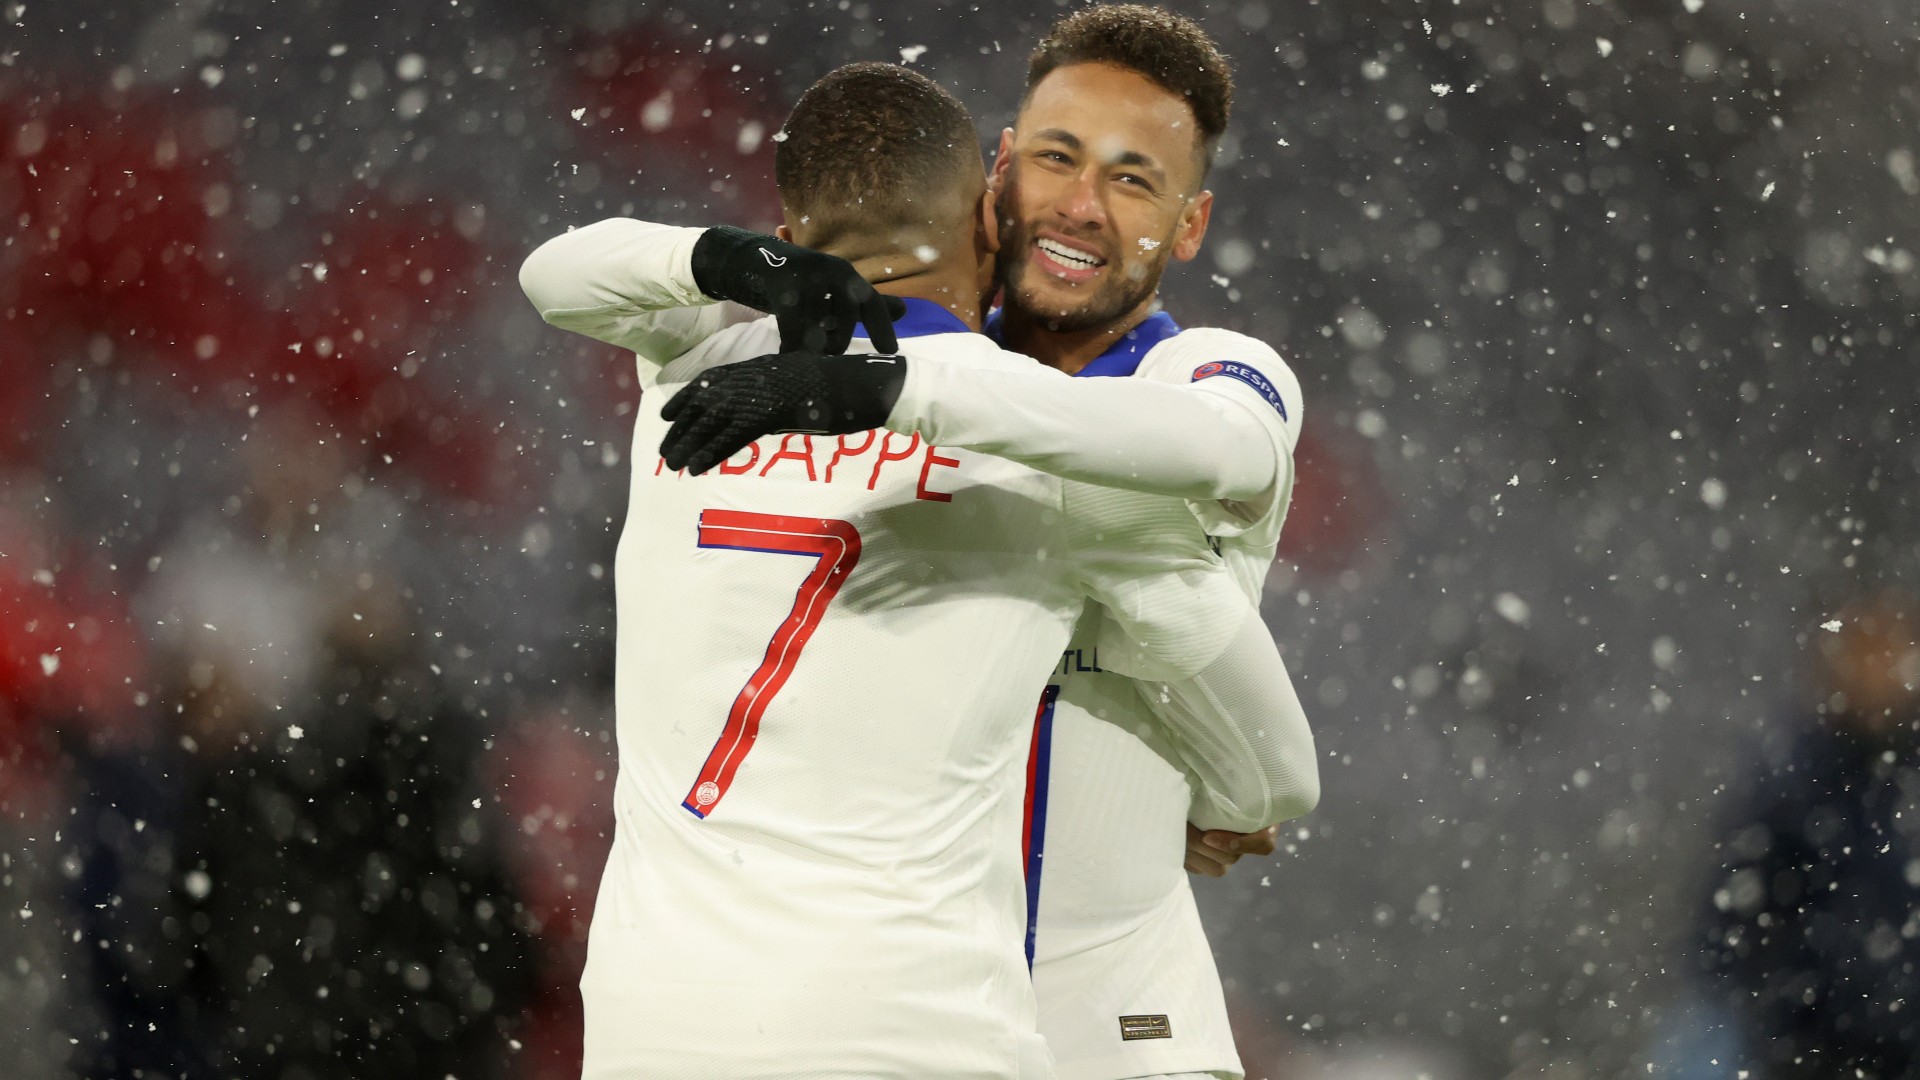 Neymar has played alongside Kylian Mbappe at PSG since 2017 and credited him for his transition, labeling him their 'golden boy'.